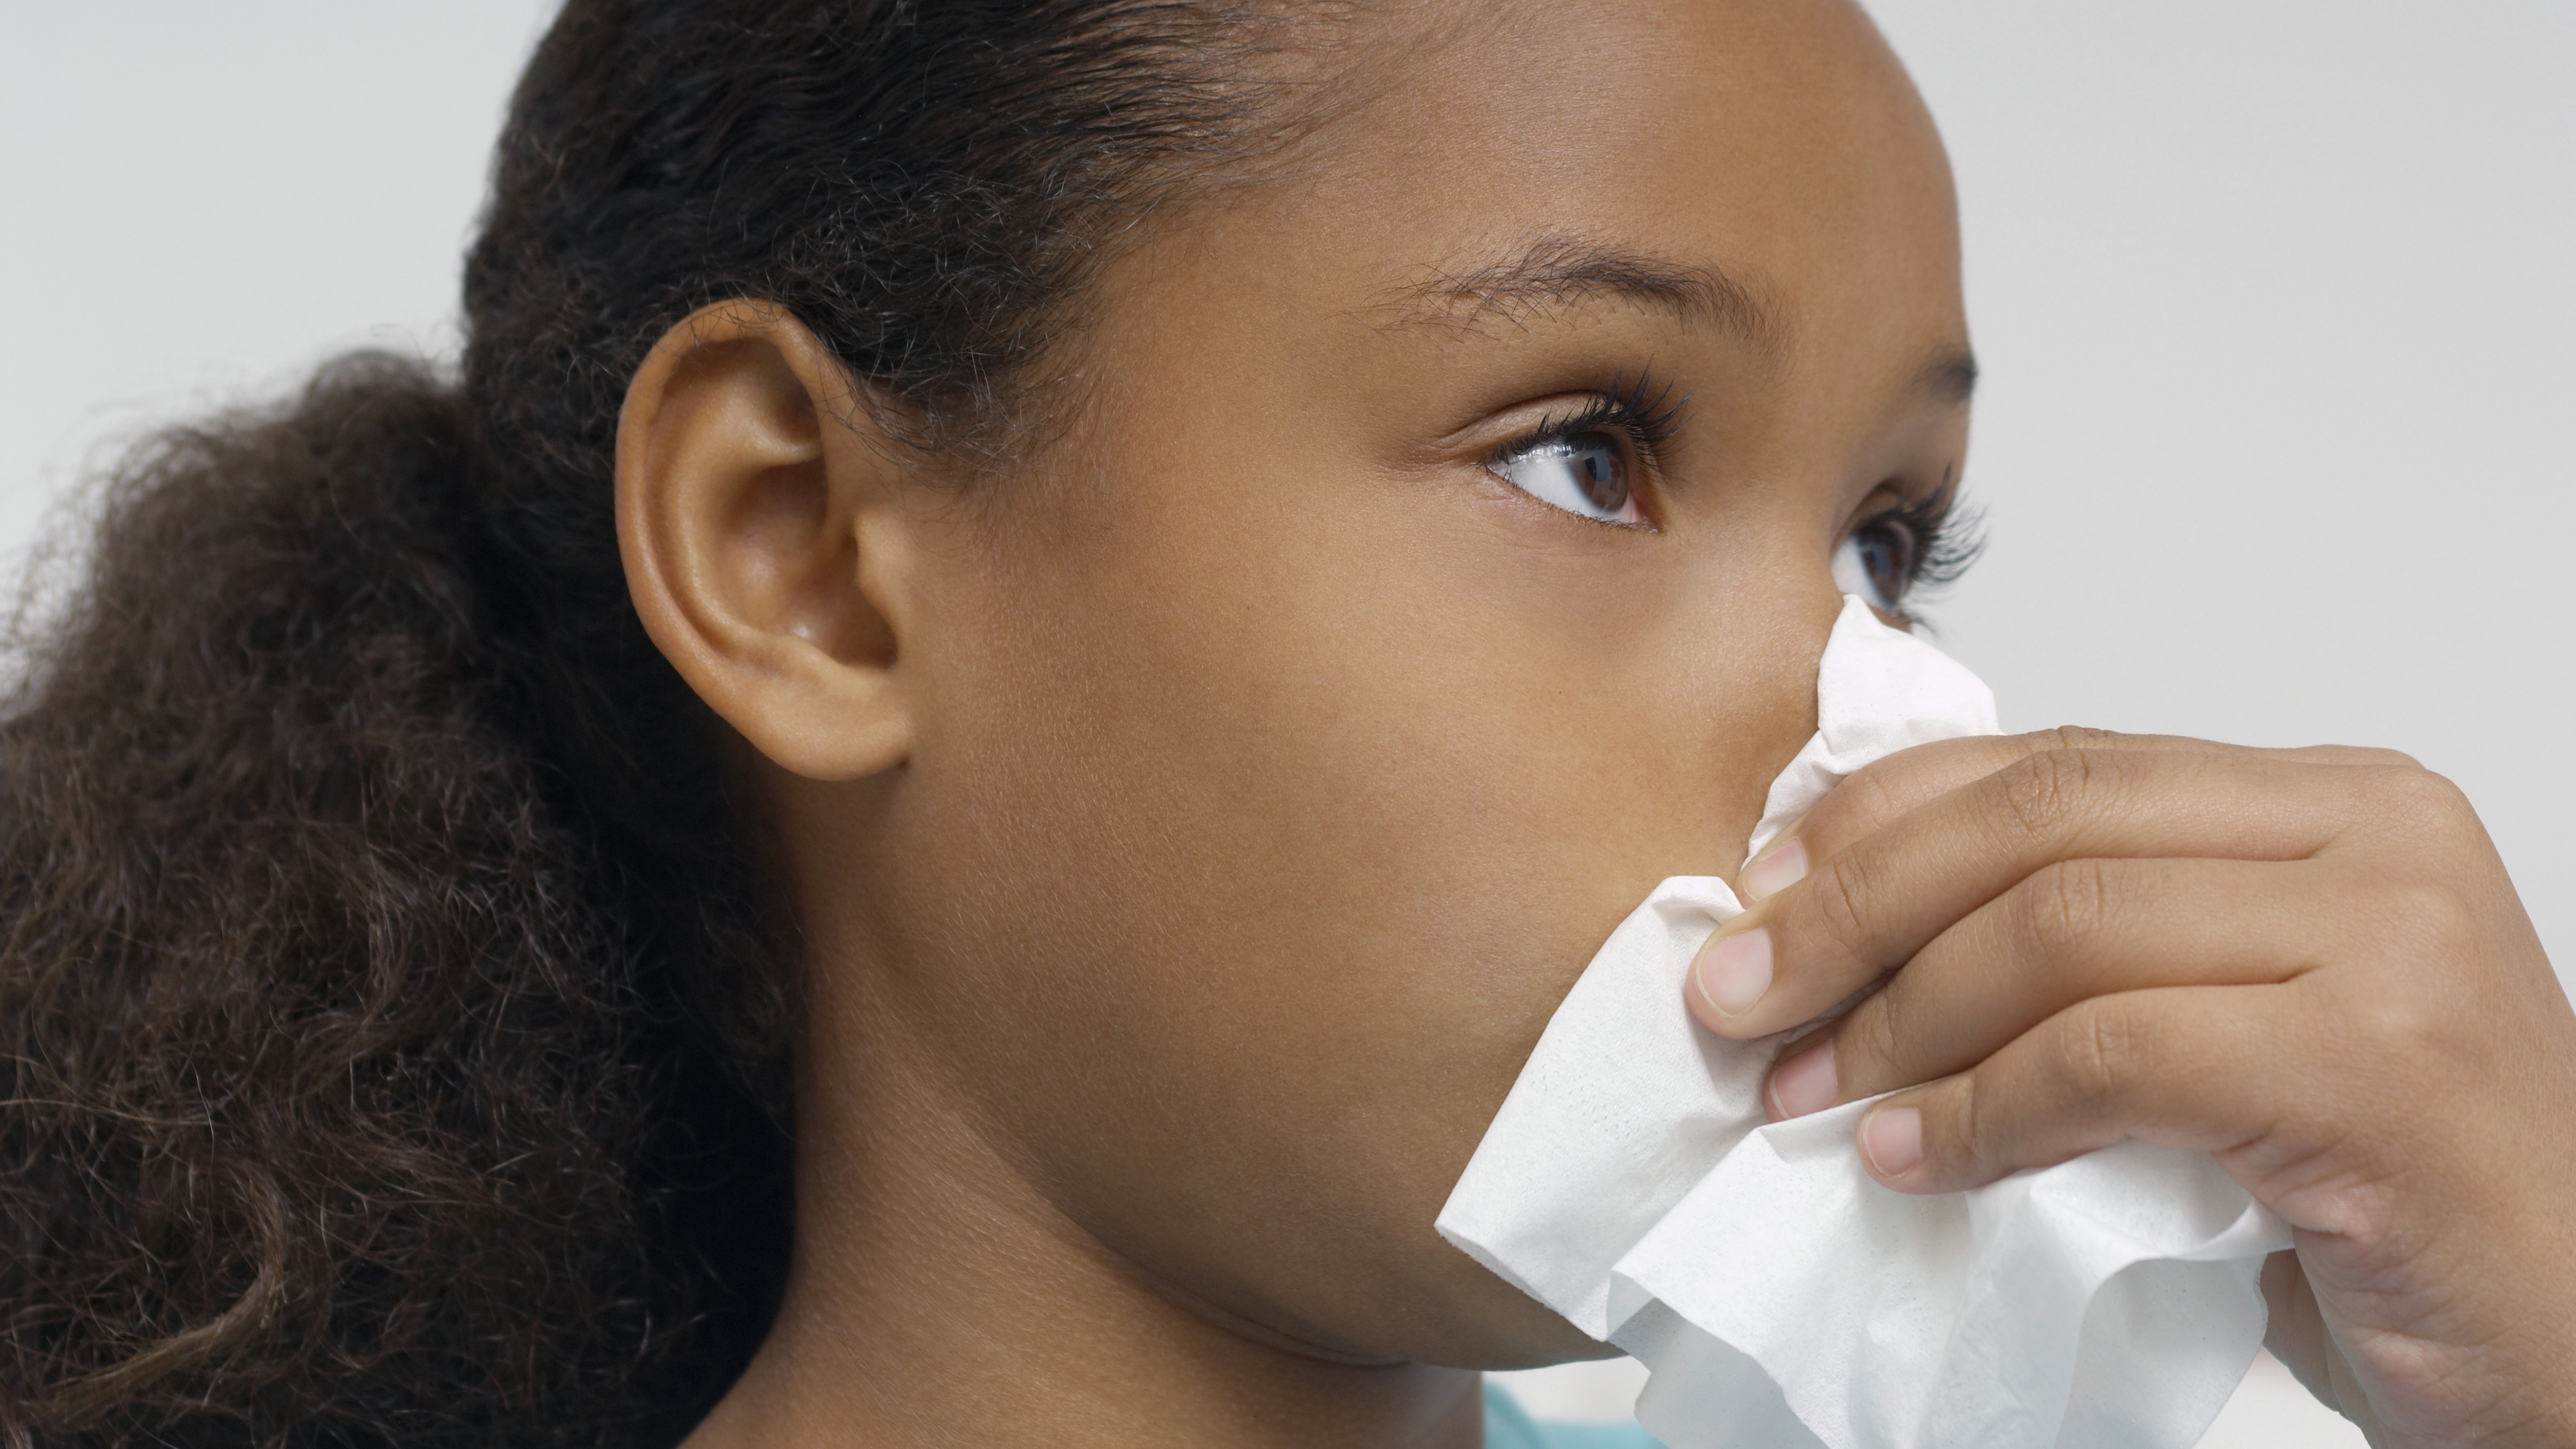 a young girl blowing her nose, perhaps sick with a cold or allergies